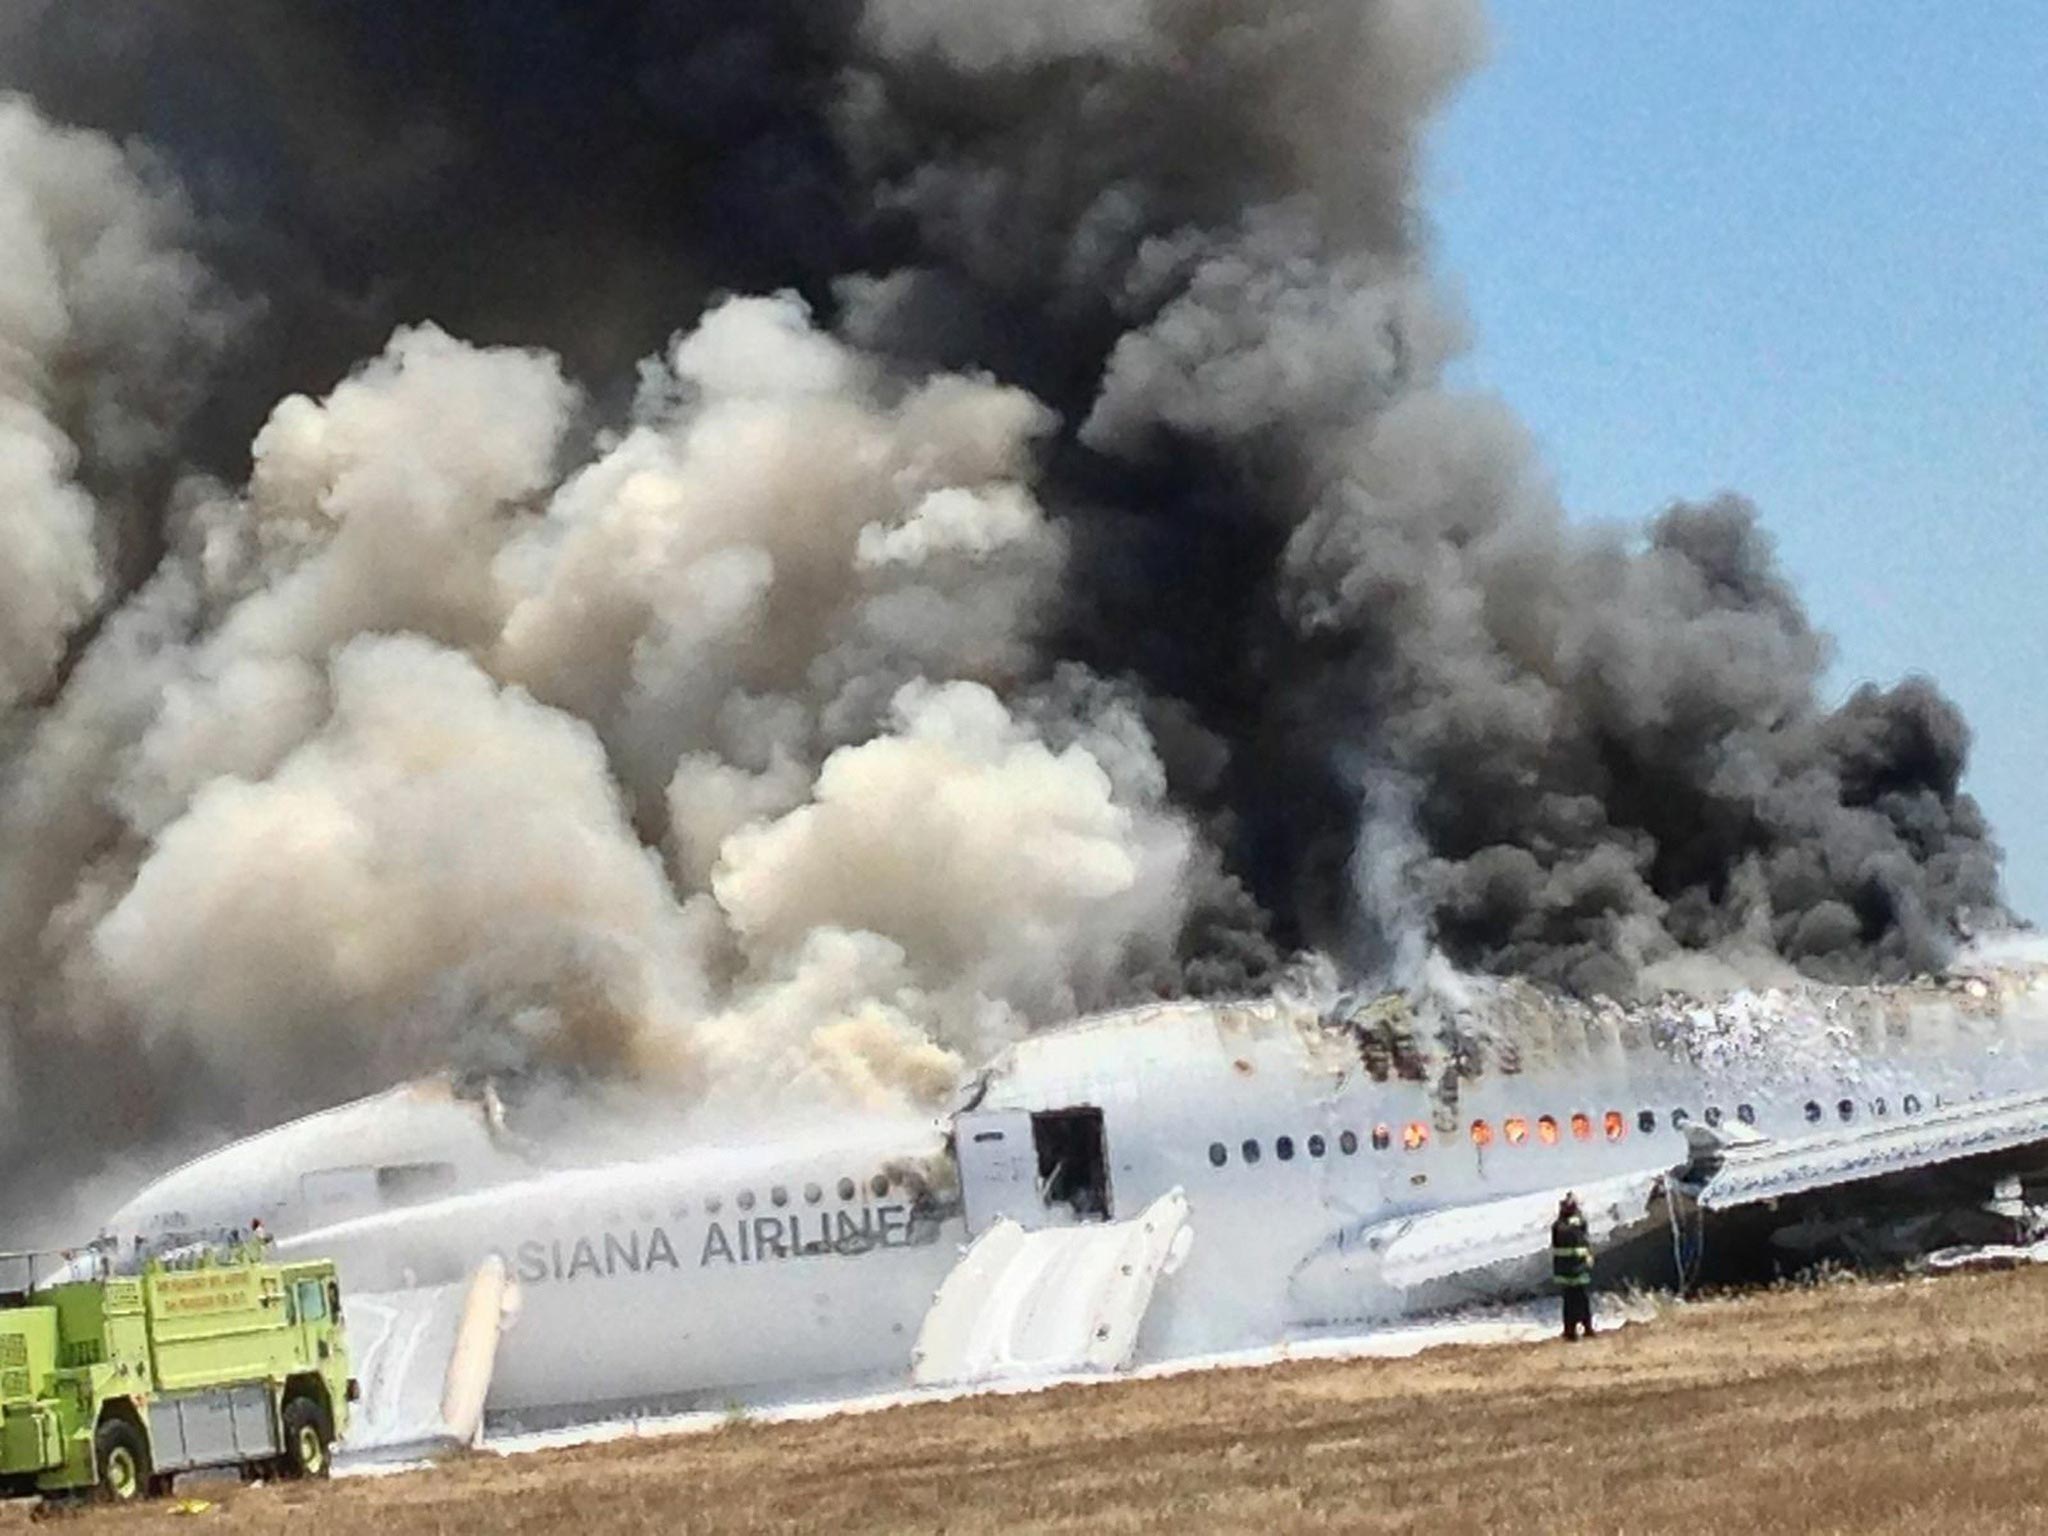 Asiana Airlines Boeing 777 is engulfed on the tarmac after crash landing at San Francisco International Airport in San Francisco, California